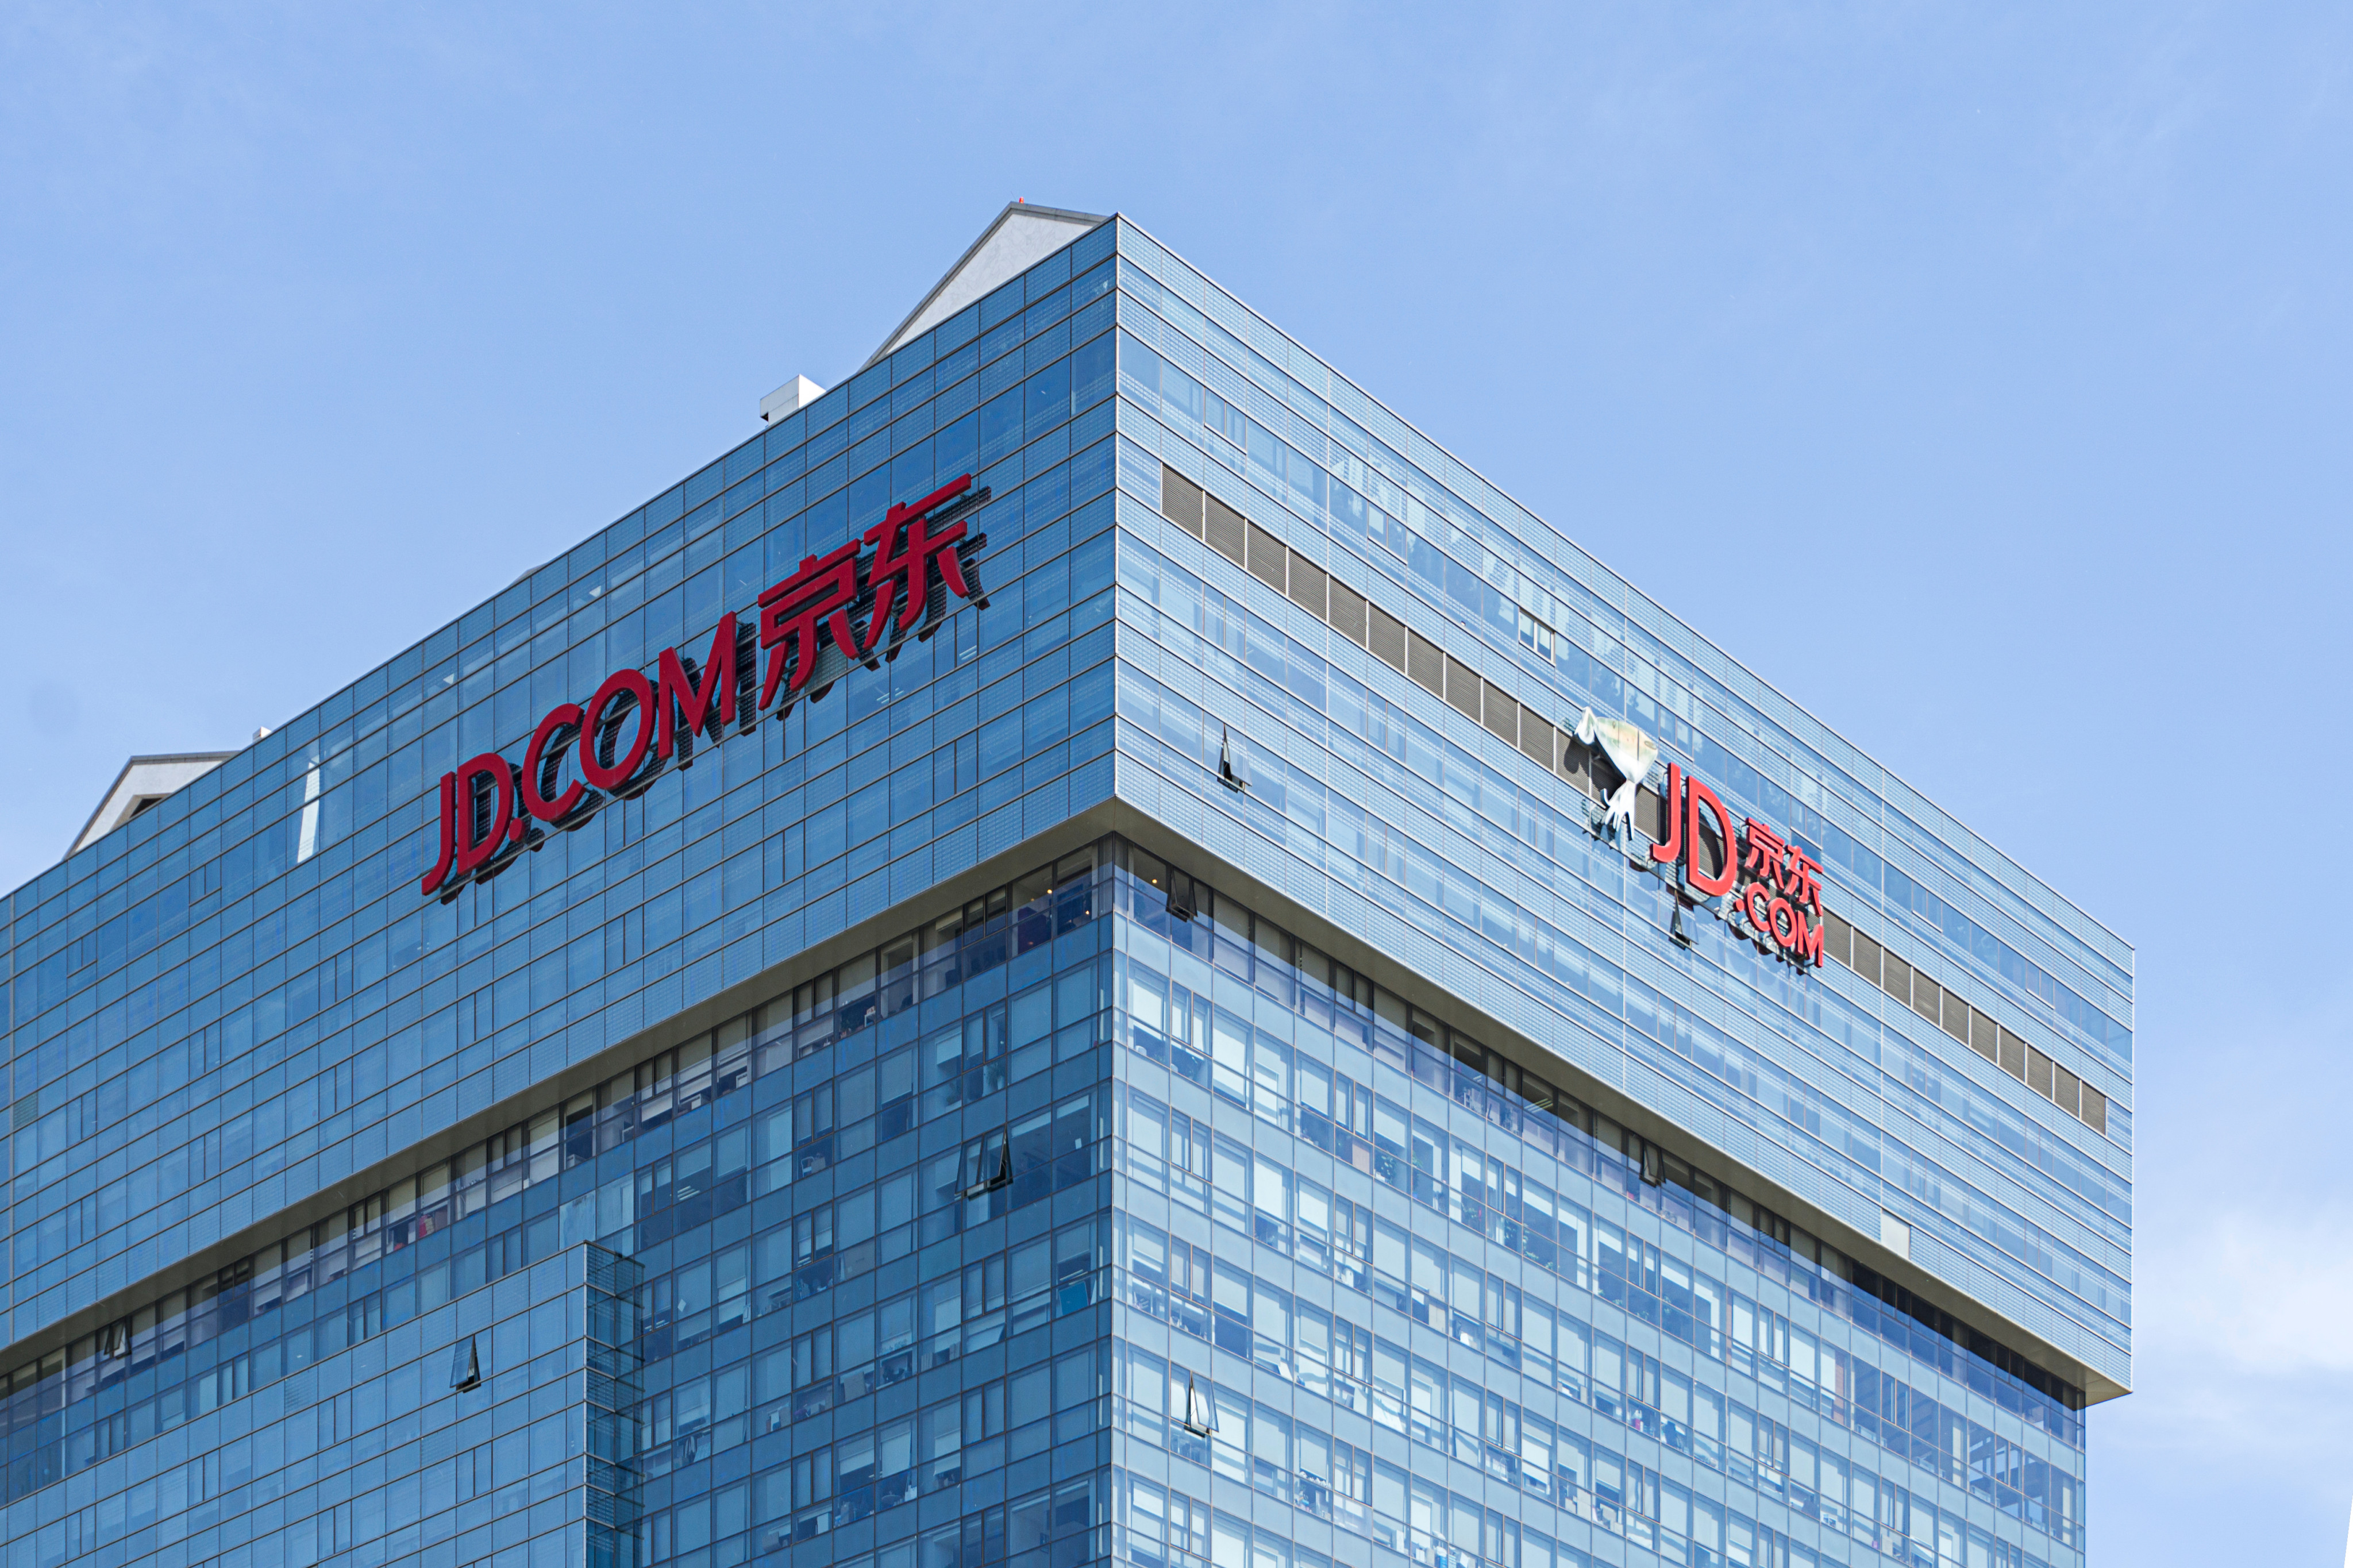 The JD.com logo seen on its headquarters building in Beijing. Photo: Shutterstock Images